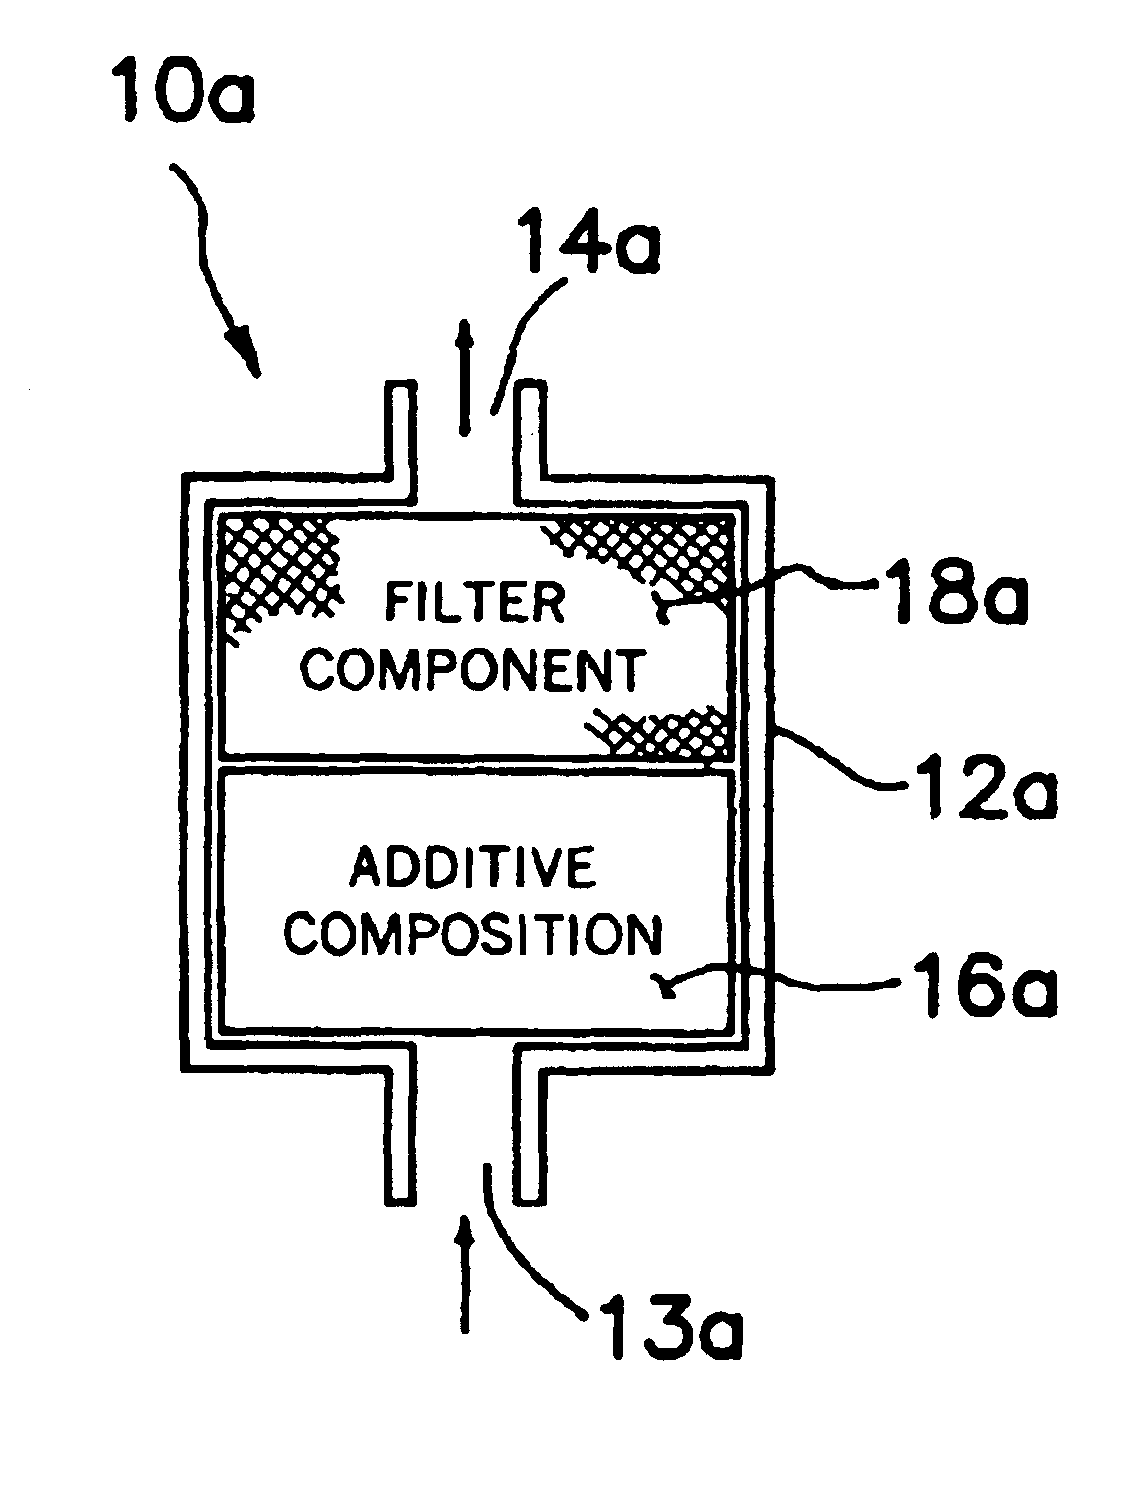 Sustained release coolant additive composition